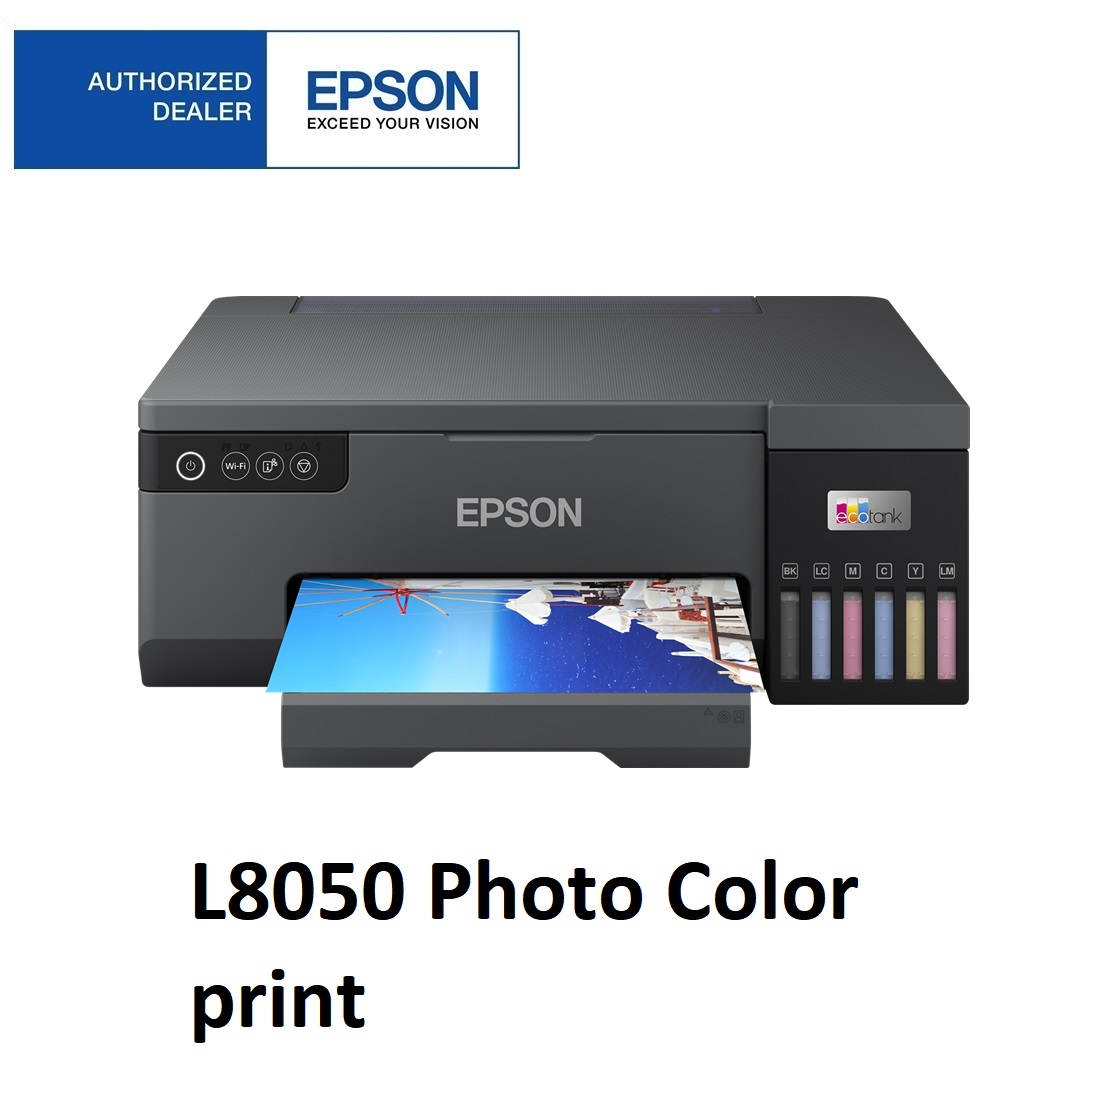 Bage At regere Afledning EPSON L8050 A4 COLOUR SINGLE FUNCTION INK TANK PHOTO PRINTER (Comes with 6  Epson original ink bottles),wireless Borderless up to A4, CD/DVD printing